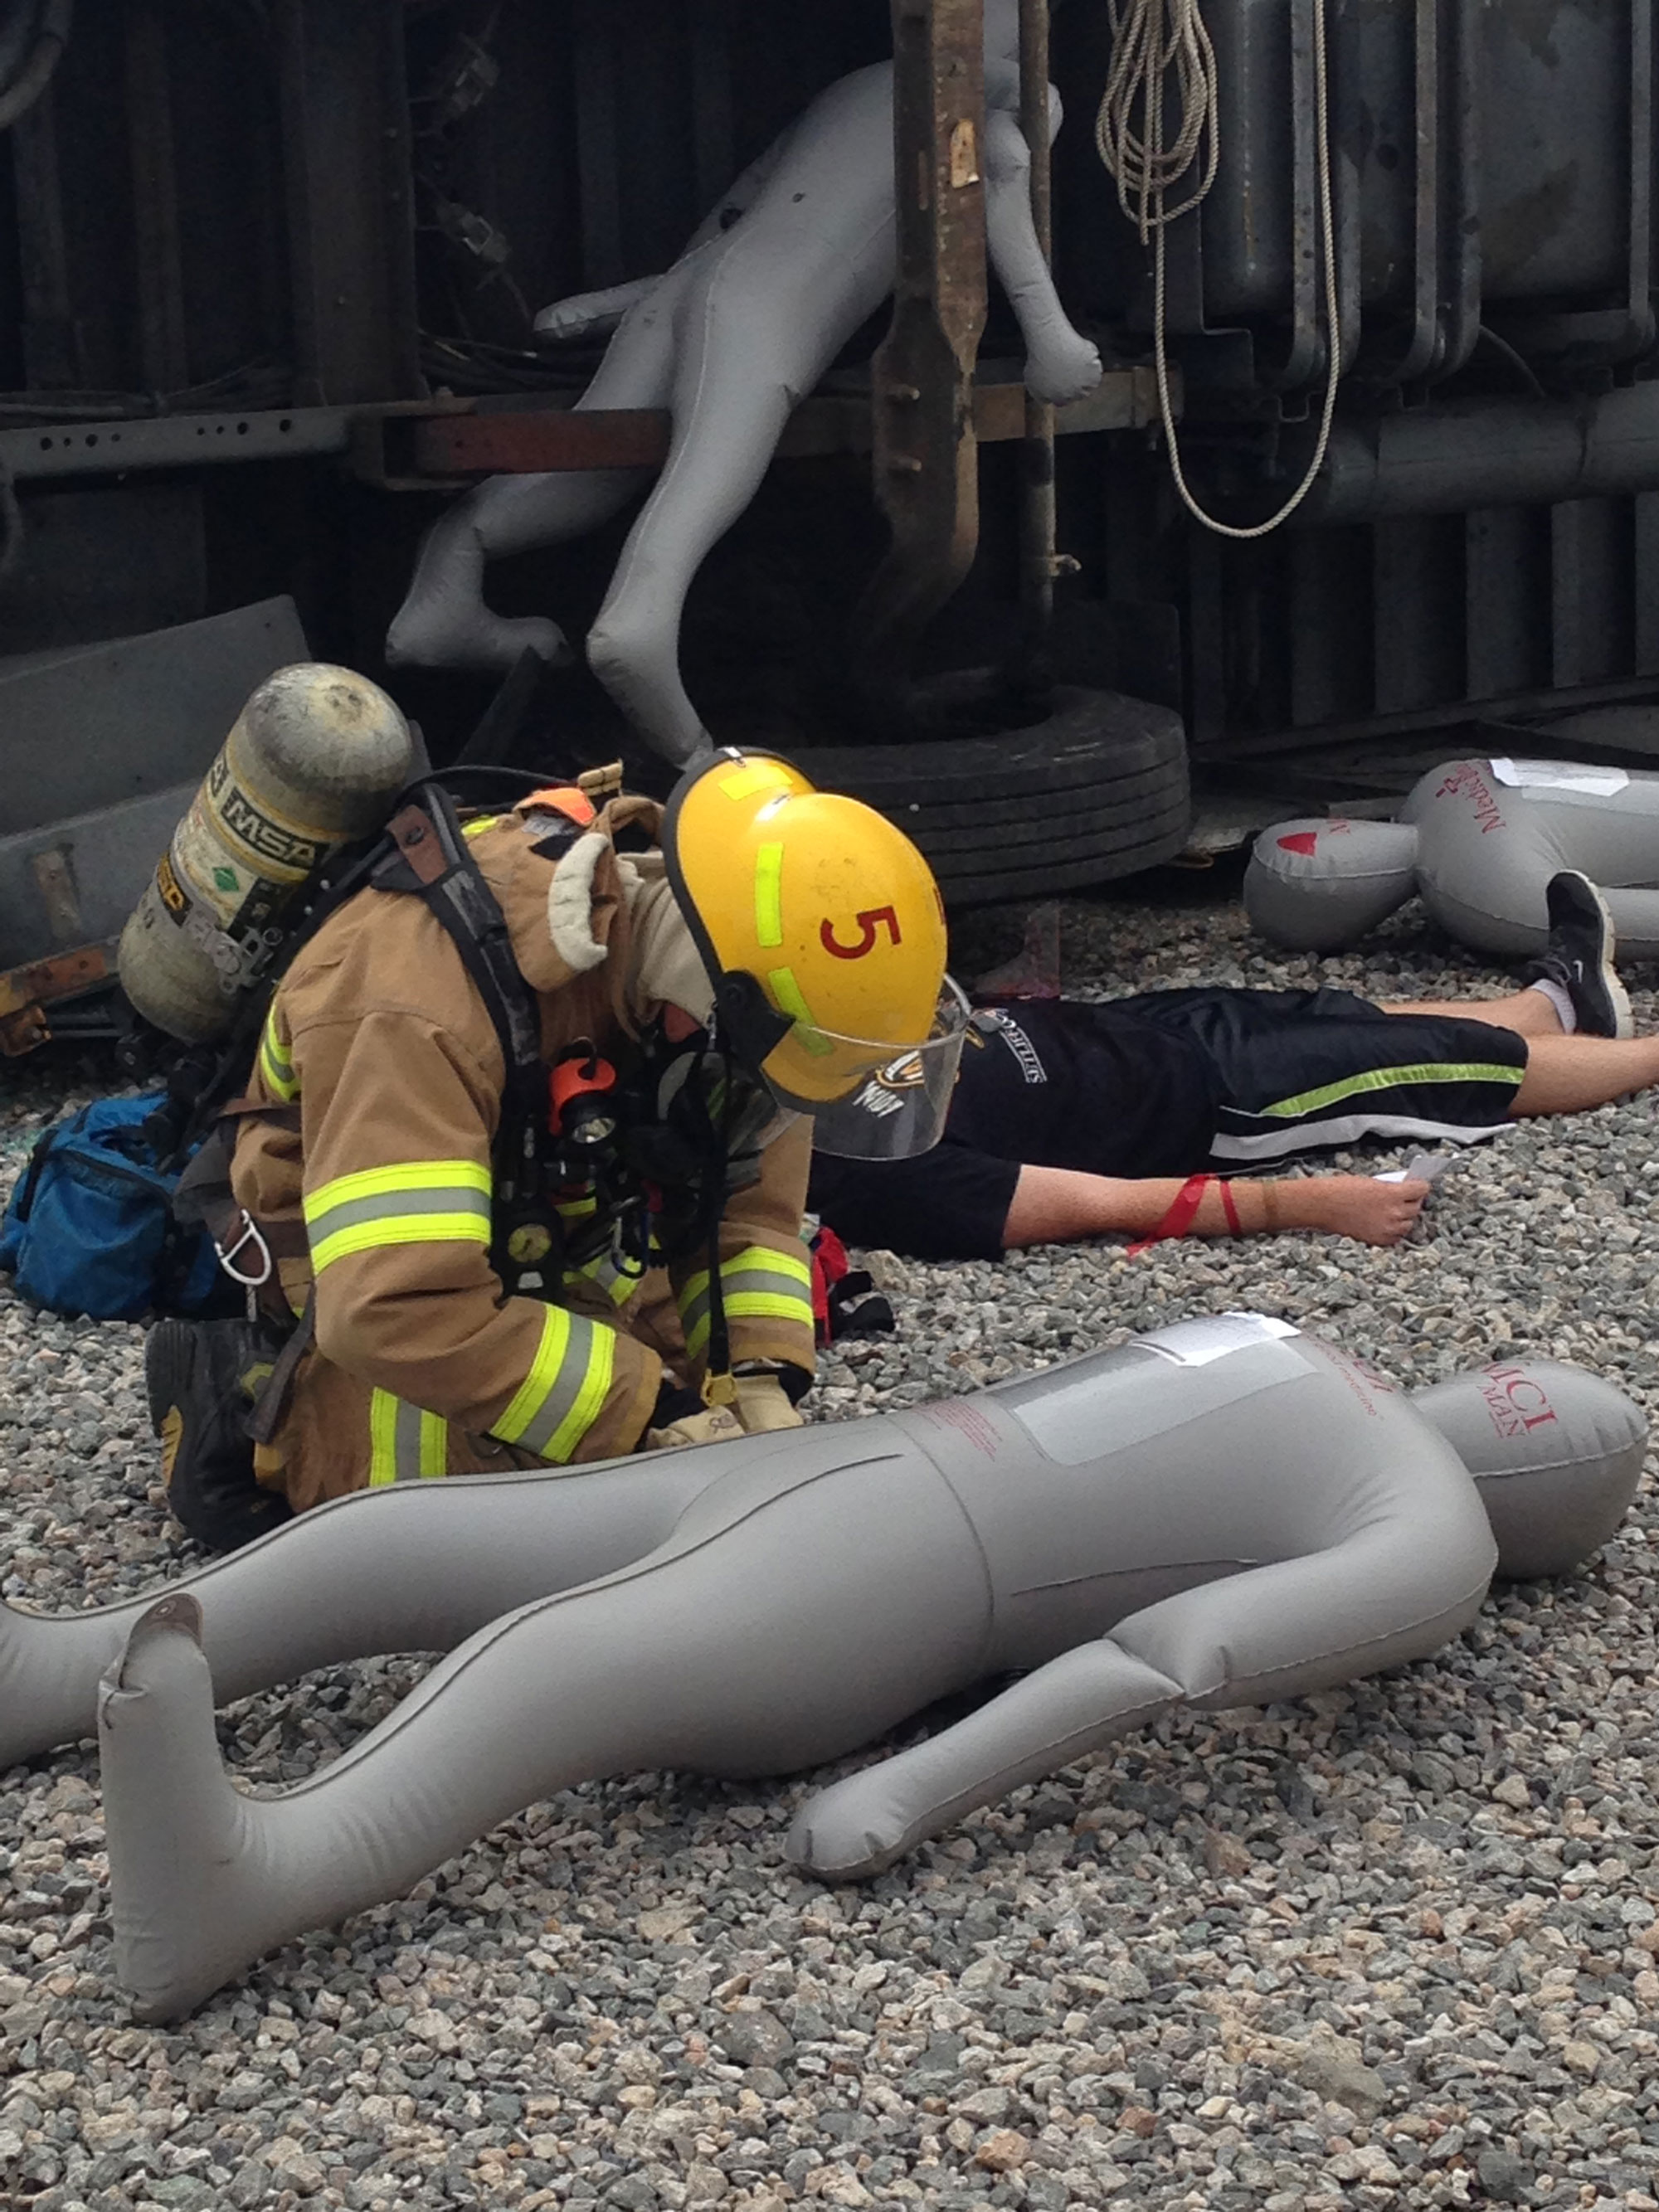 Accident Training Exercise with Dummy